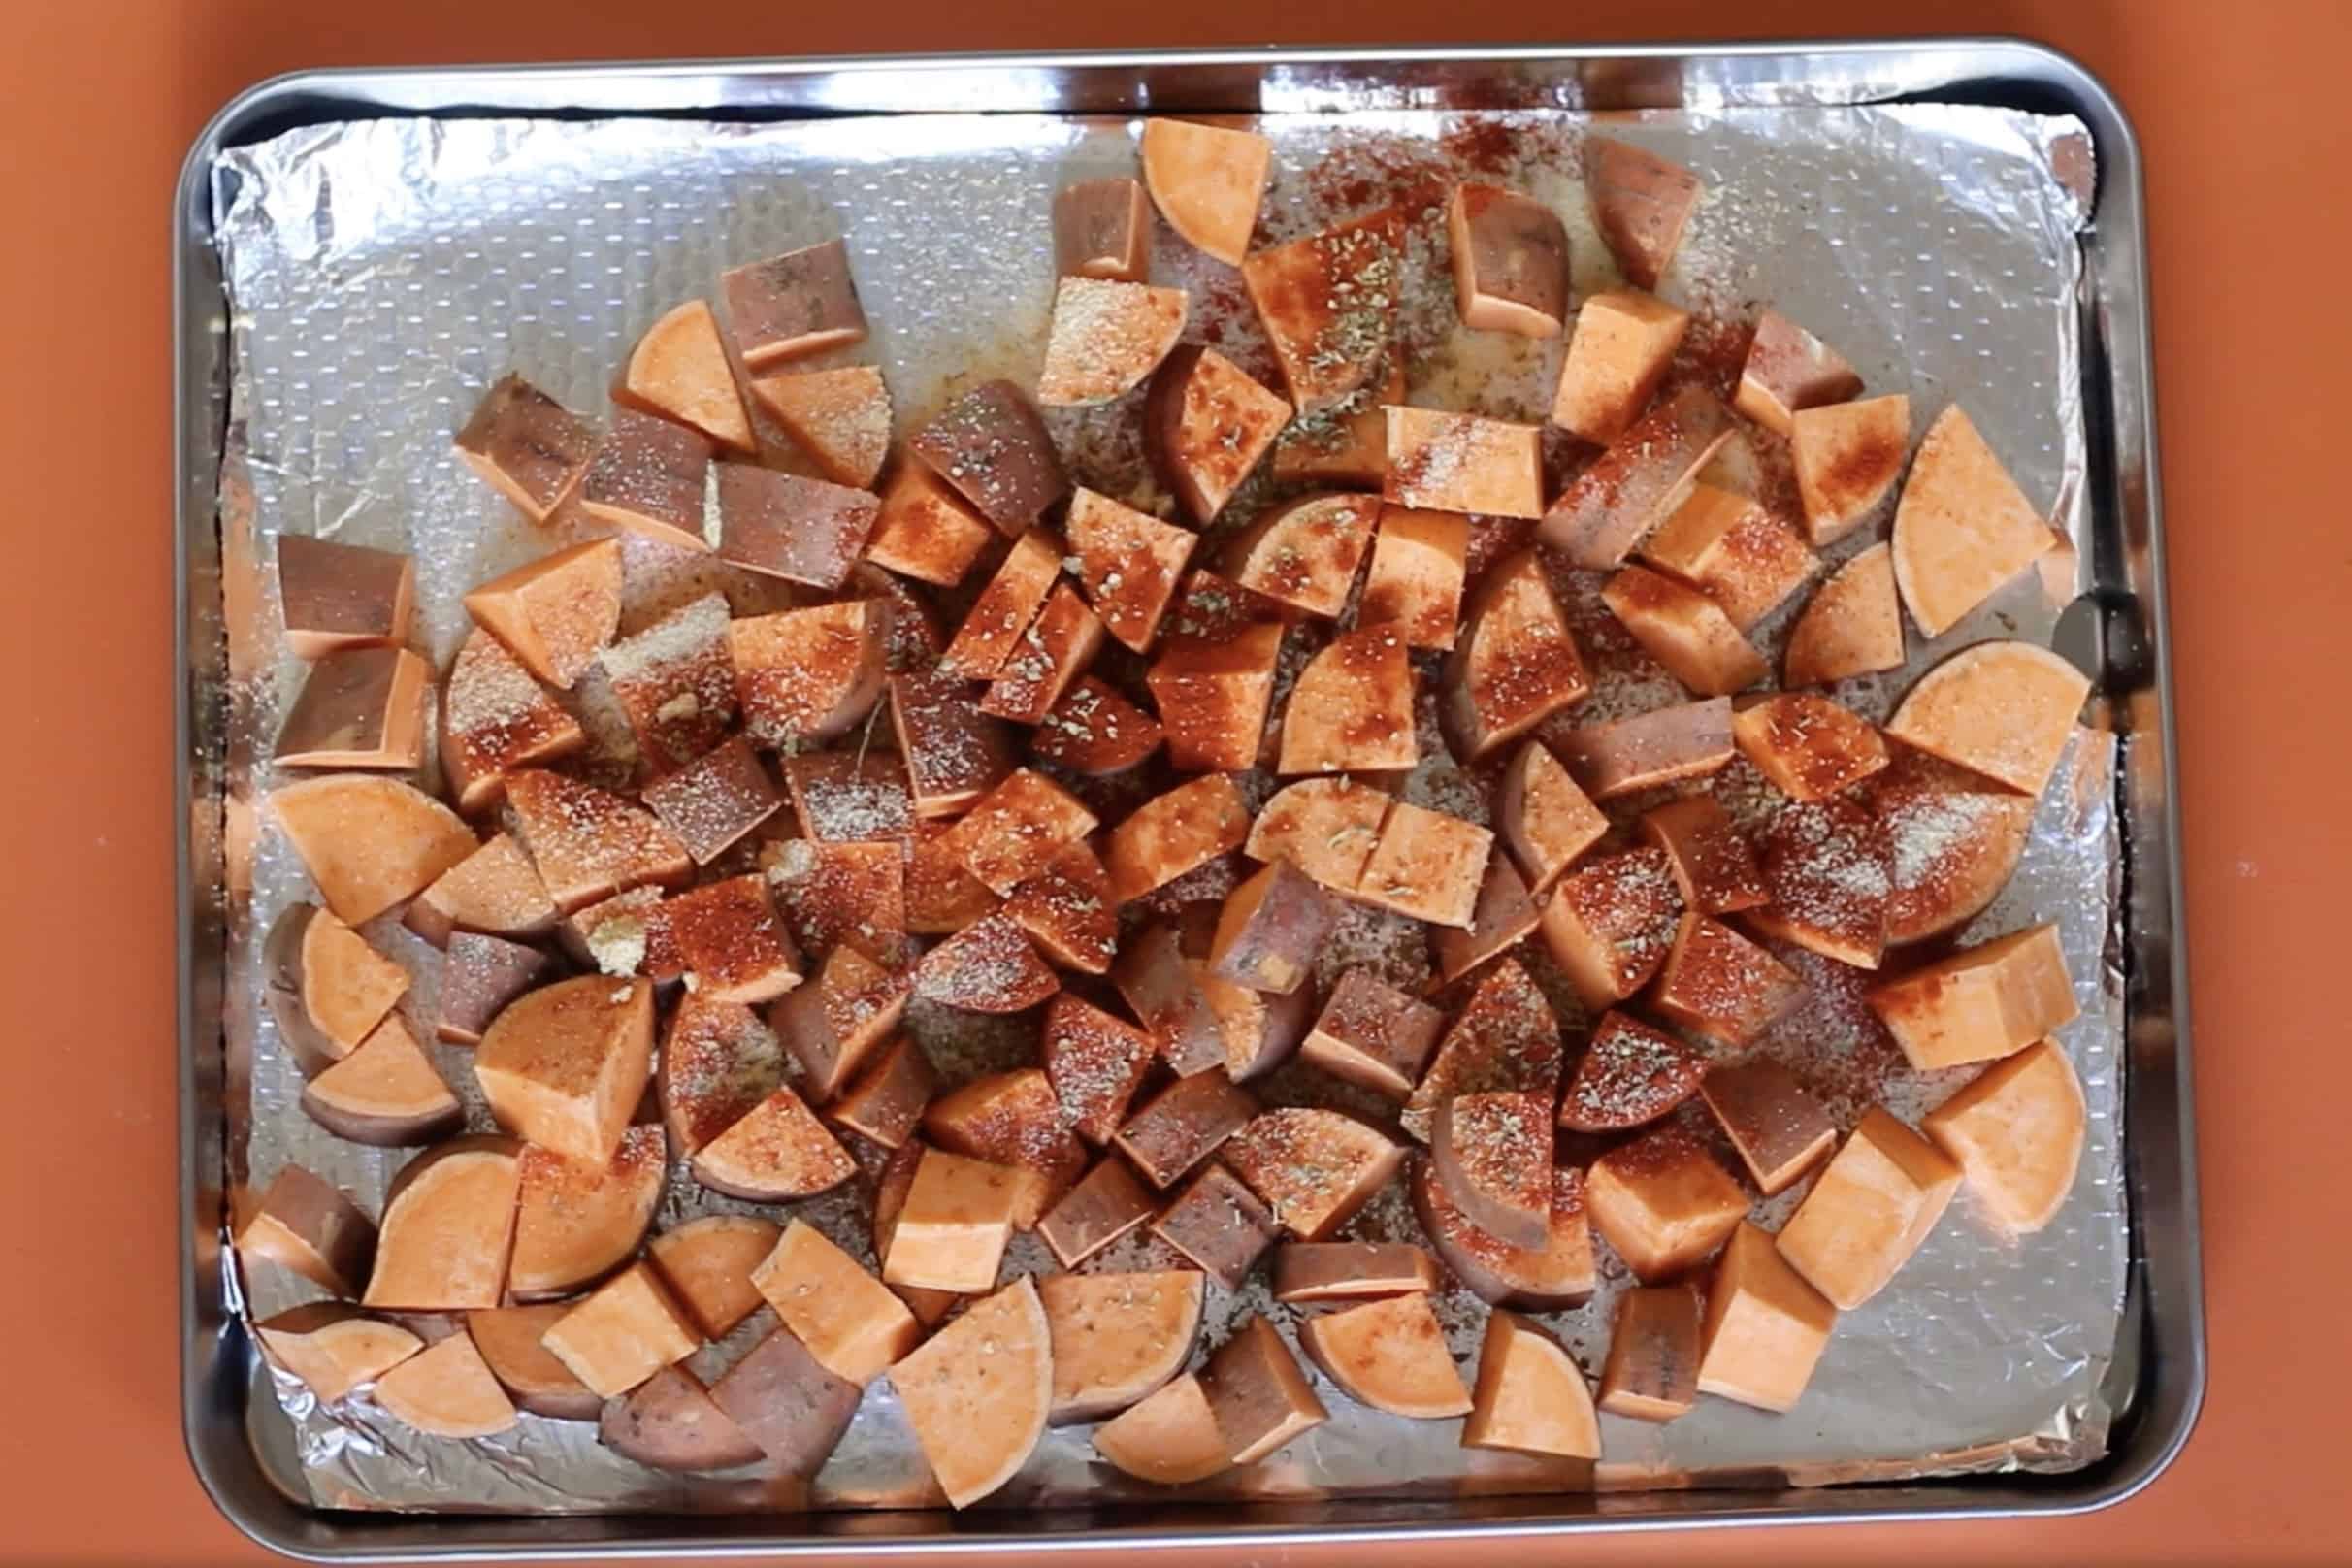 Sweet potatoes cubes with spices added on a foil lined stainless steel baking tray on an orange background.